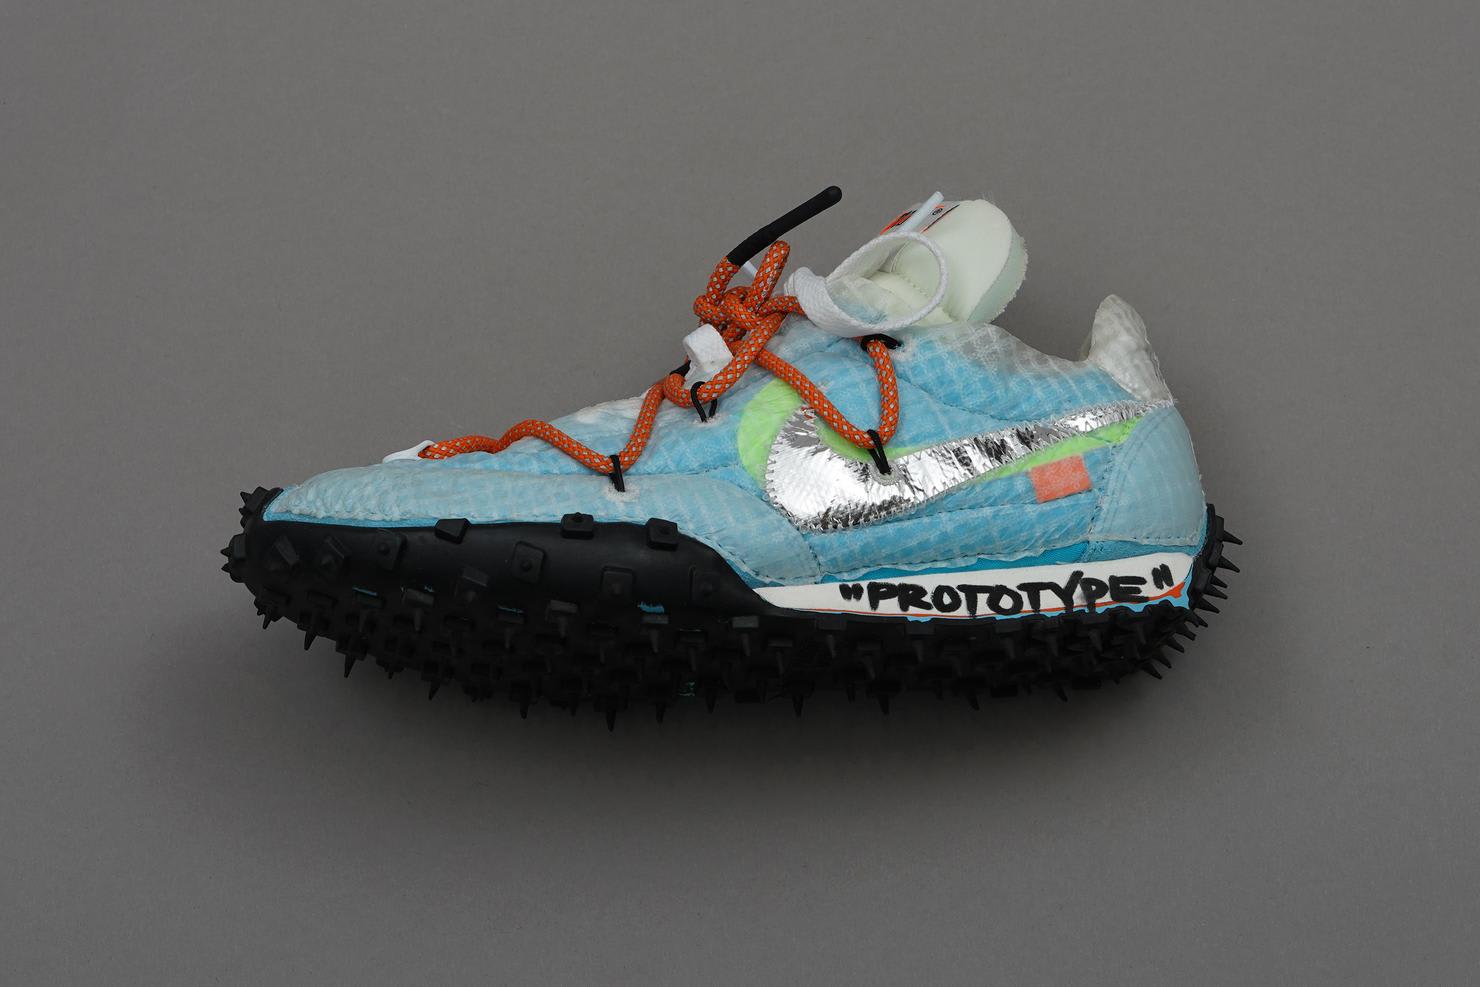 A Closer Look at Virgil Abloh's Off-White x Nike Prototypes